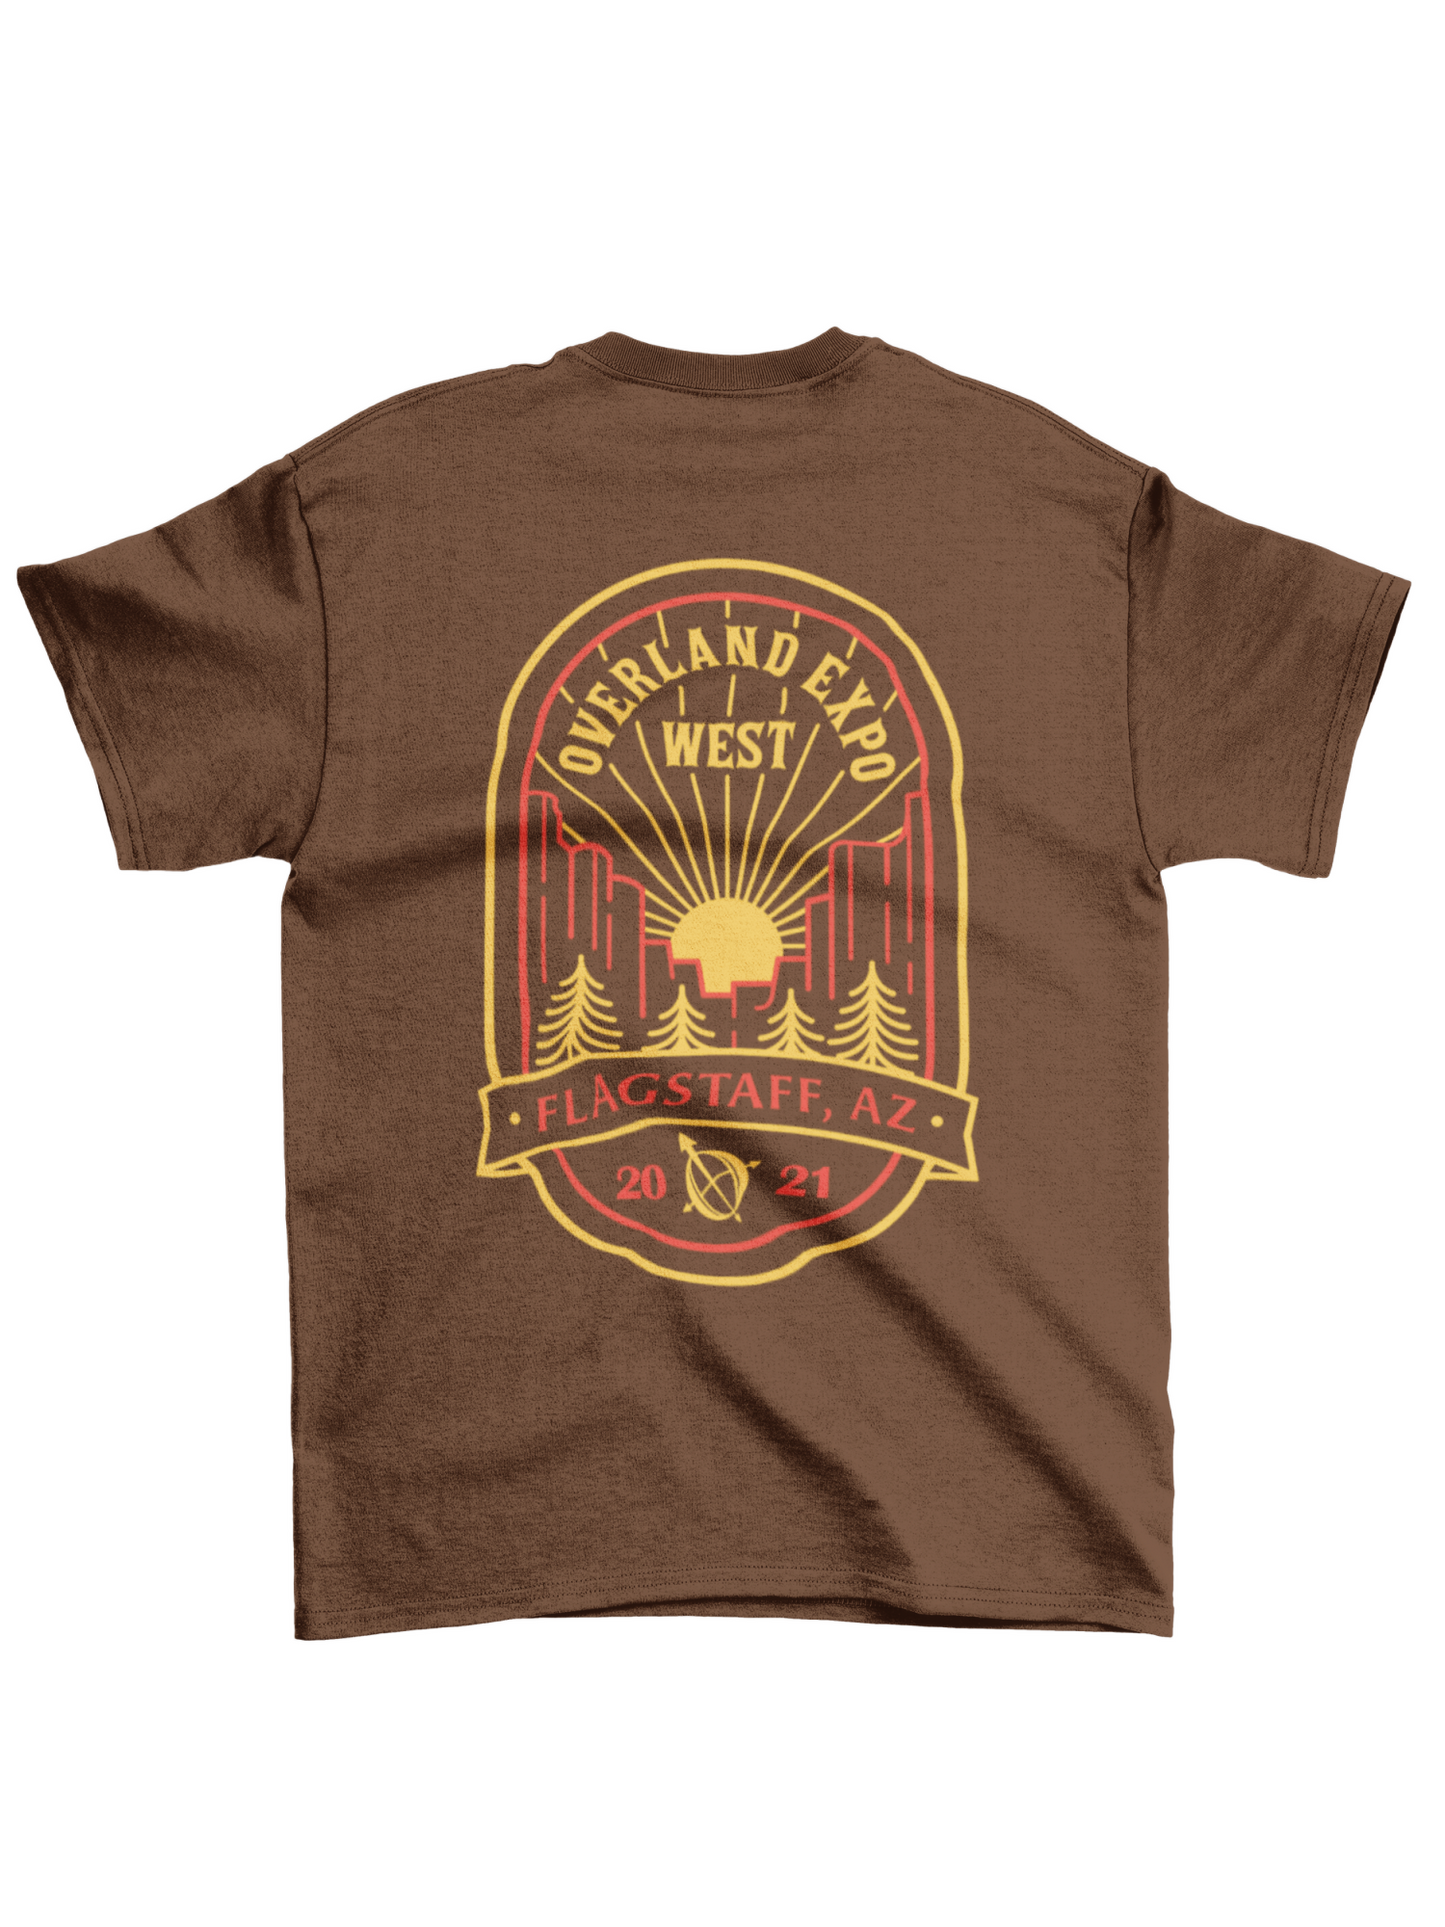 OE West 2021 - Limited Edition Tee - Brown